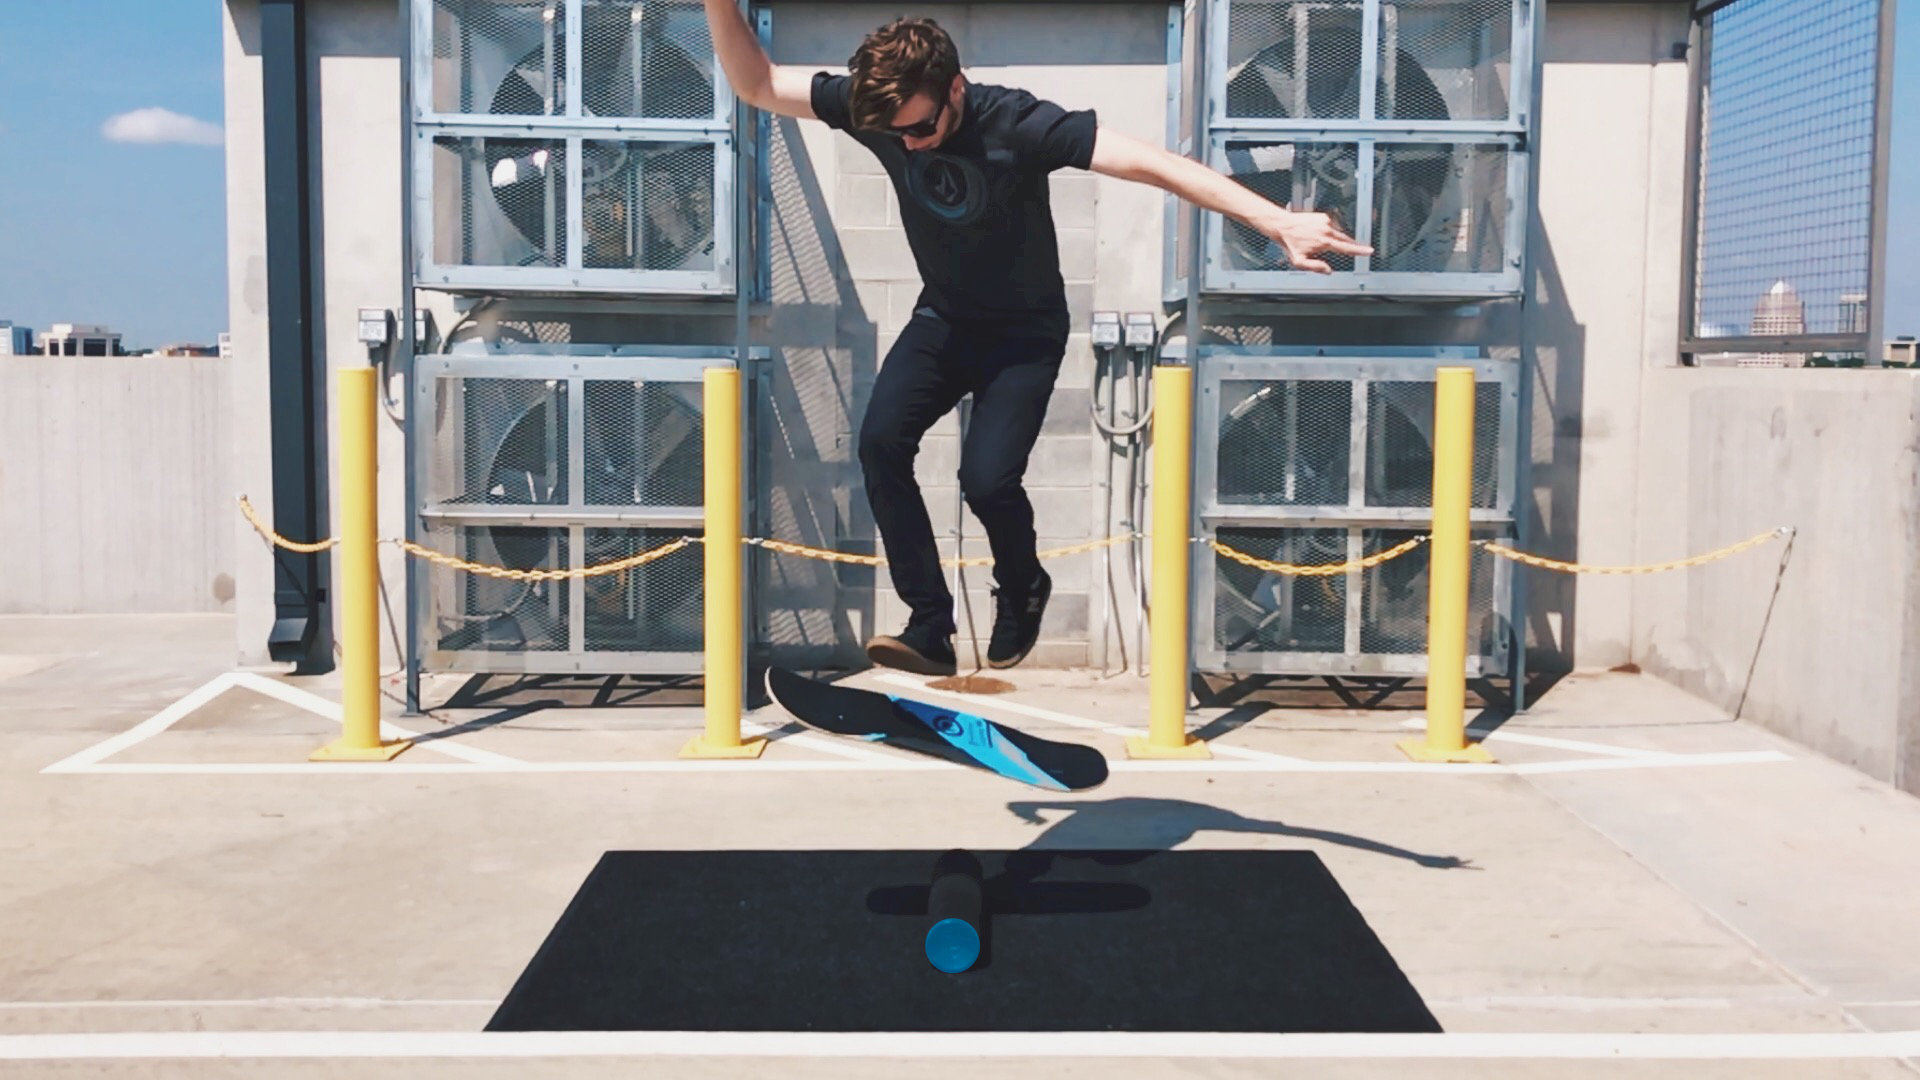 Balance boards make for a scary, fun, and surprisingly perfect pandemic workout